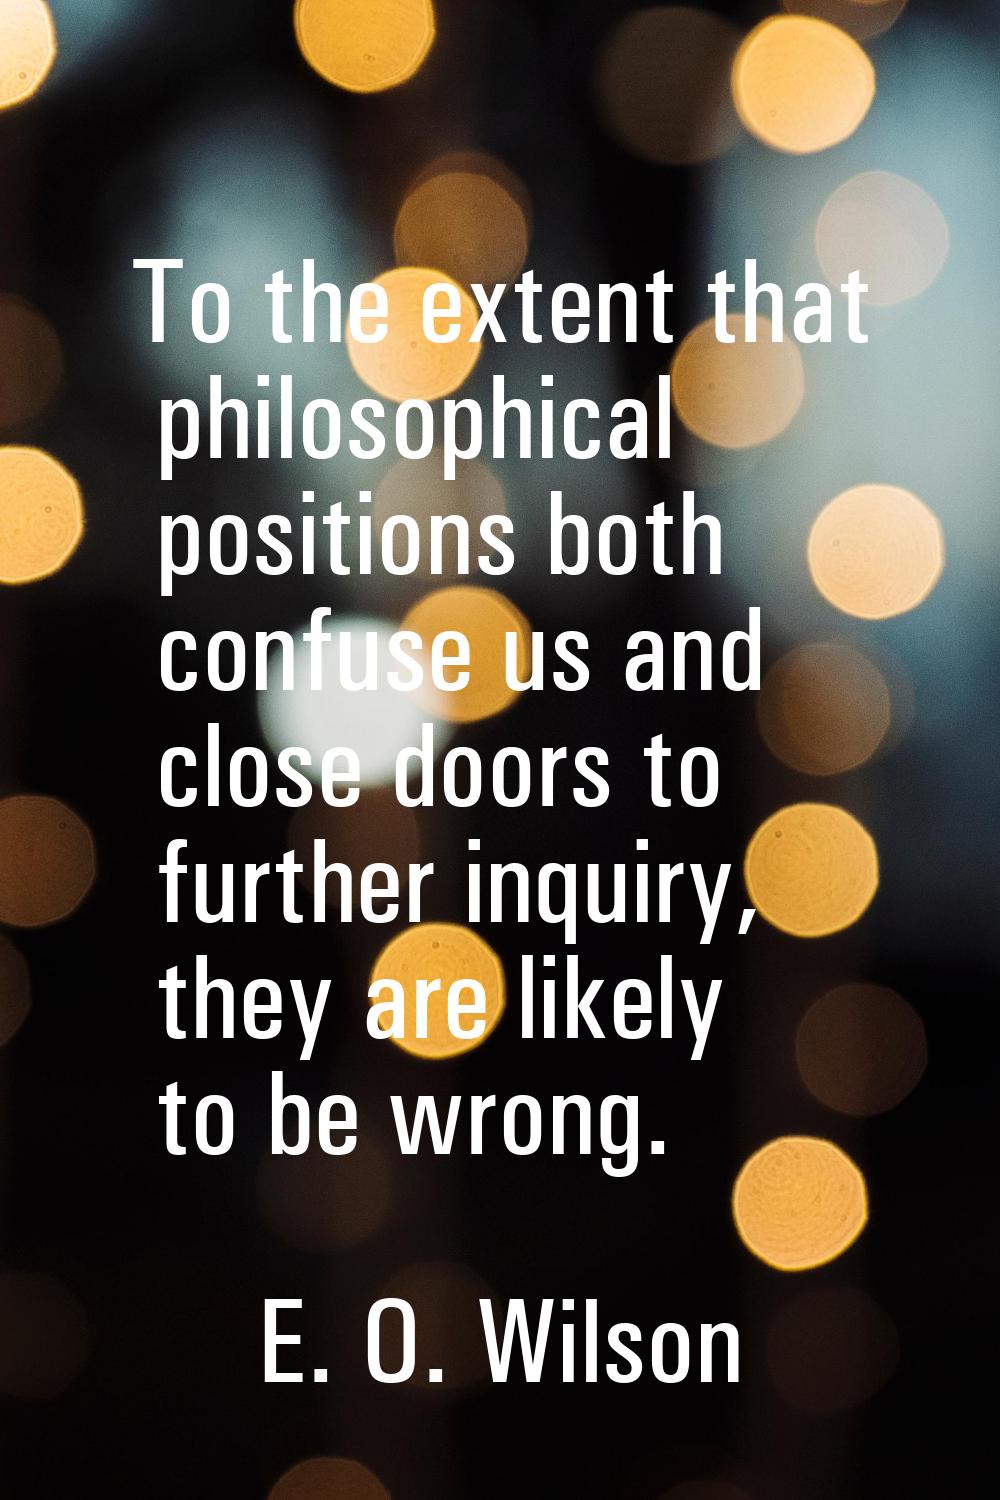 To the extent that philosophical positions both confuse us and close doors to further inquiry, they